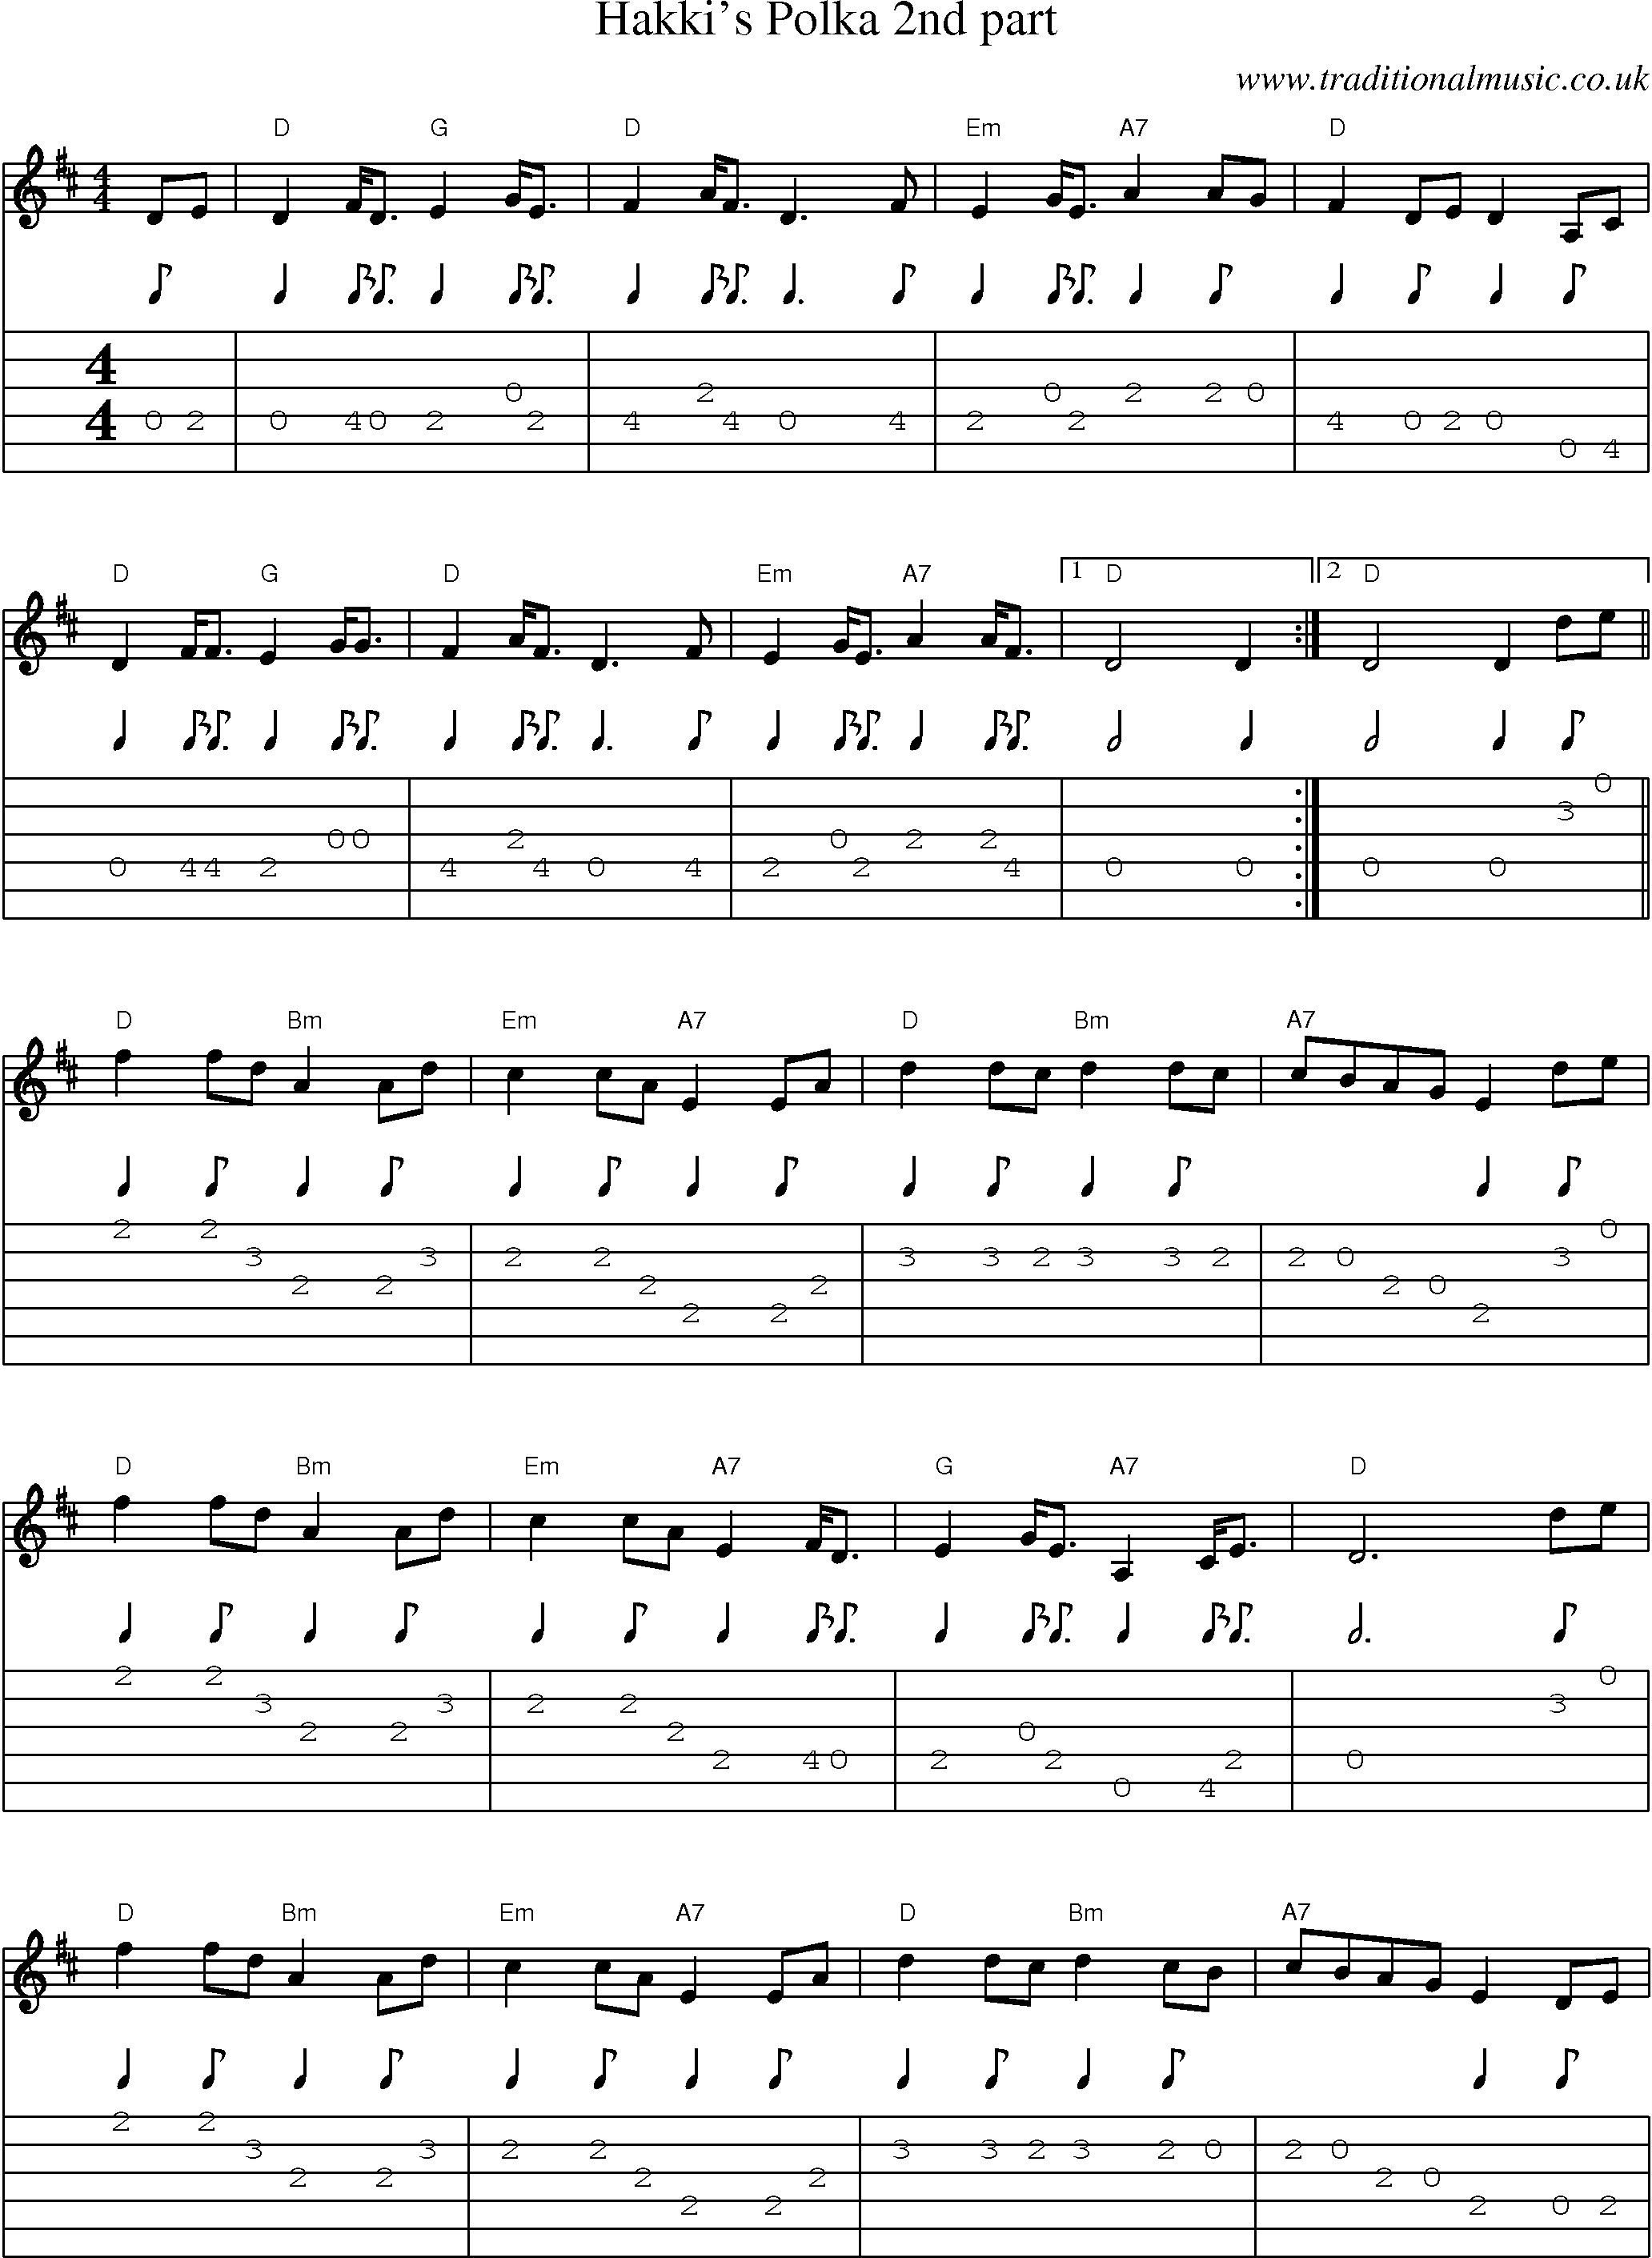 Music Score and Guitar Tabs for Hakkis Polka 2nd Part